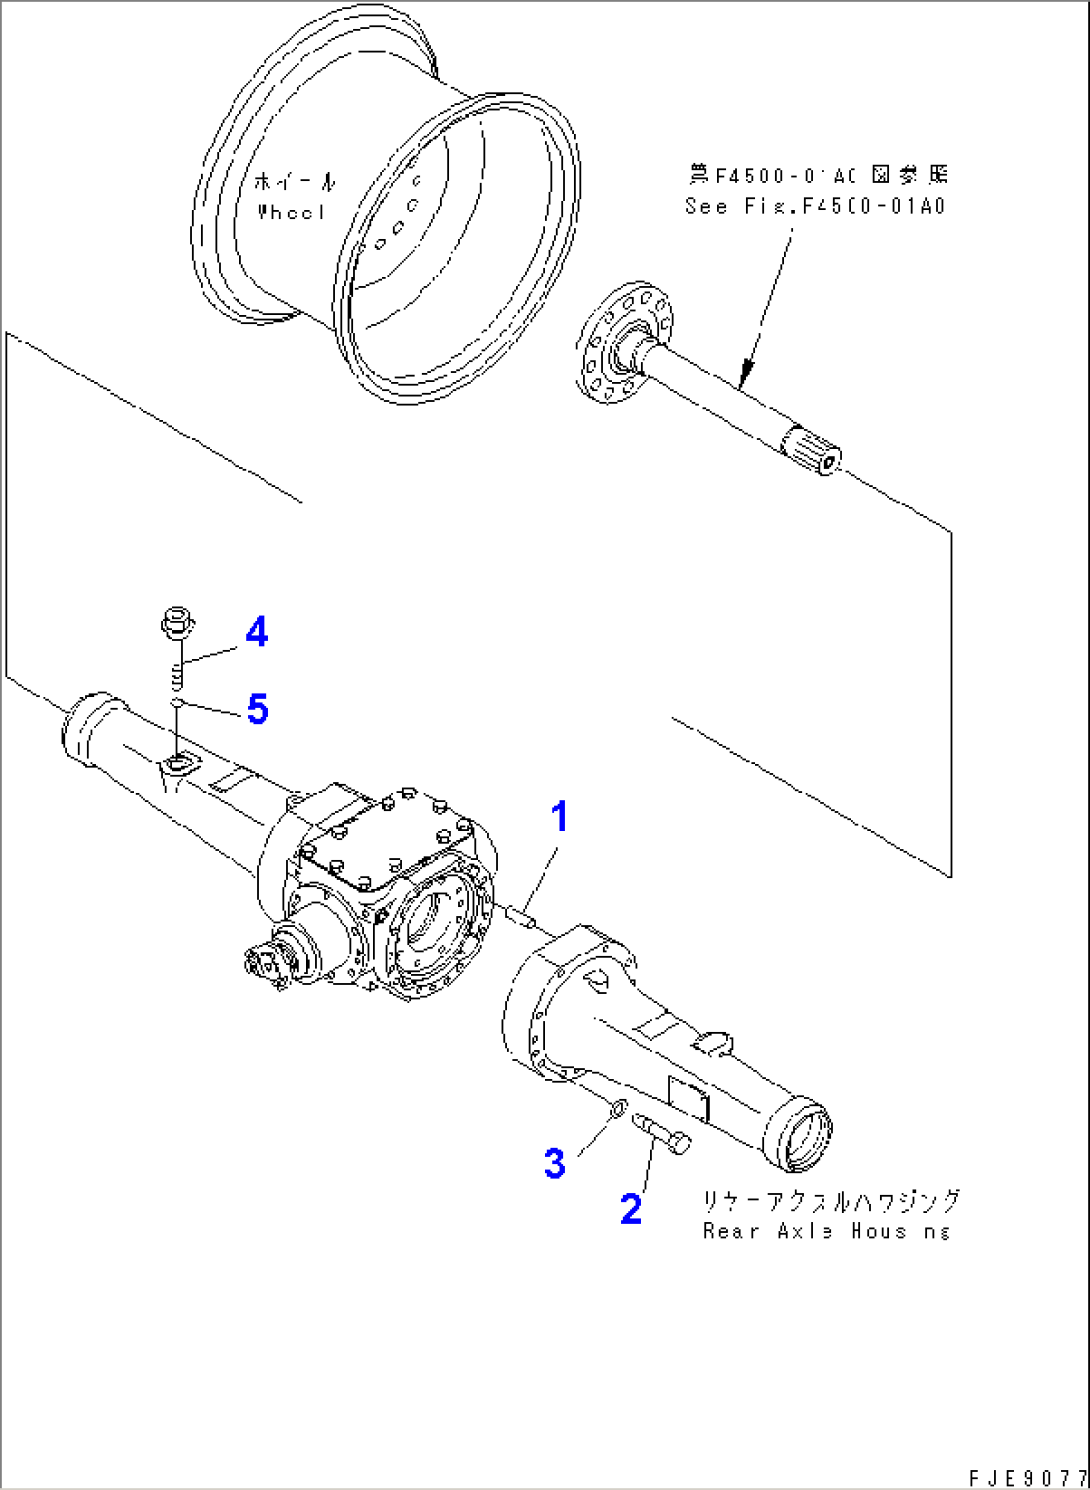 REAR AXLE (AXLE HOUSING MOUNTING PARTS)